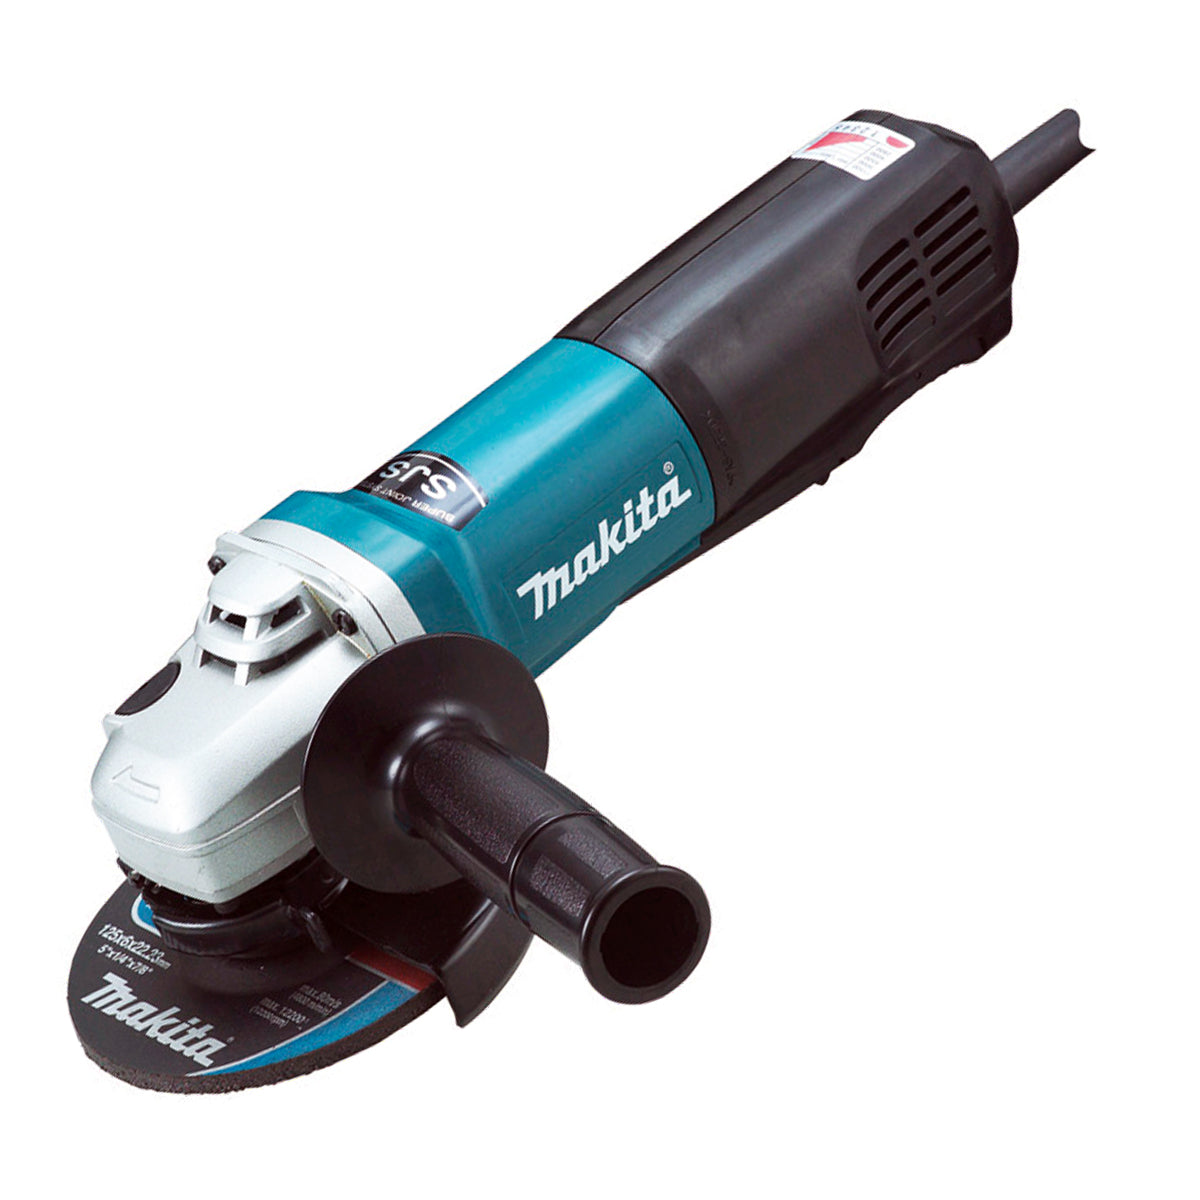 Makita 9565PCV SJS High Power Paddle Switch Angle Grinder, 5" 通販 